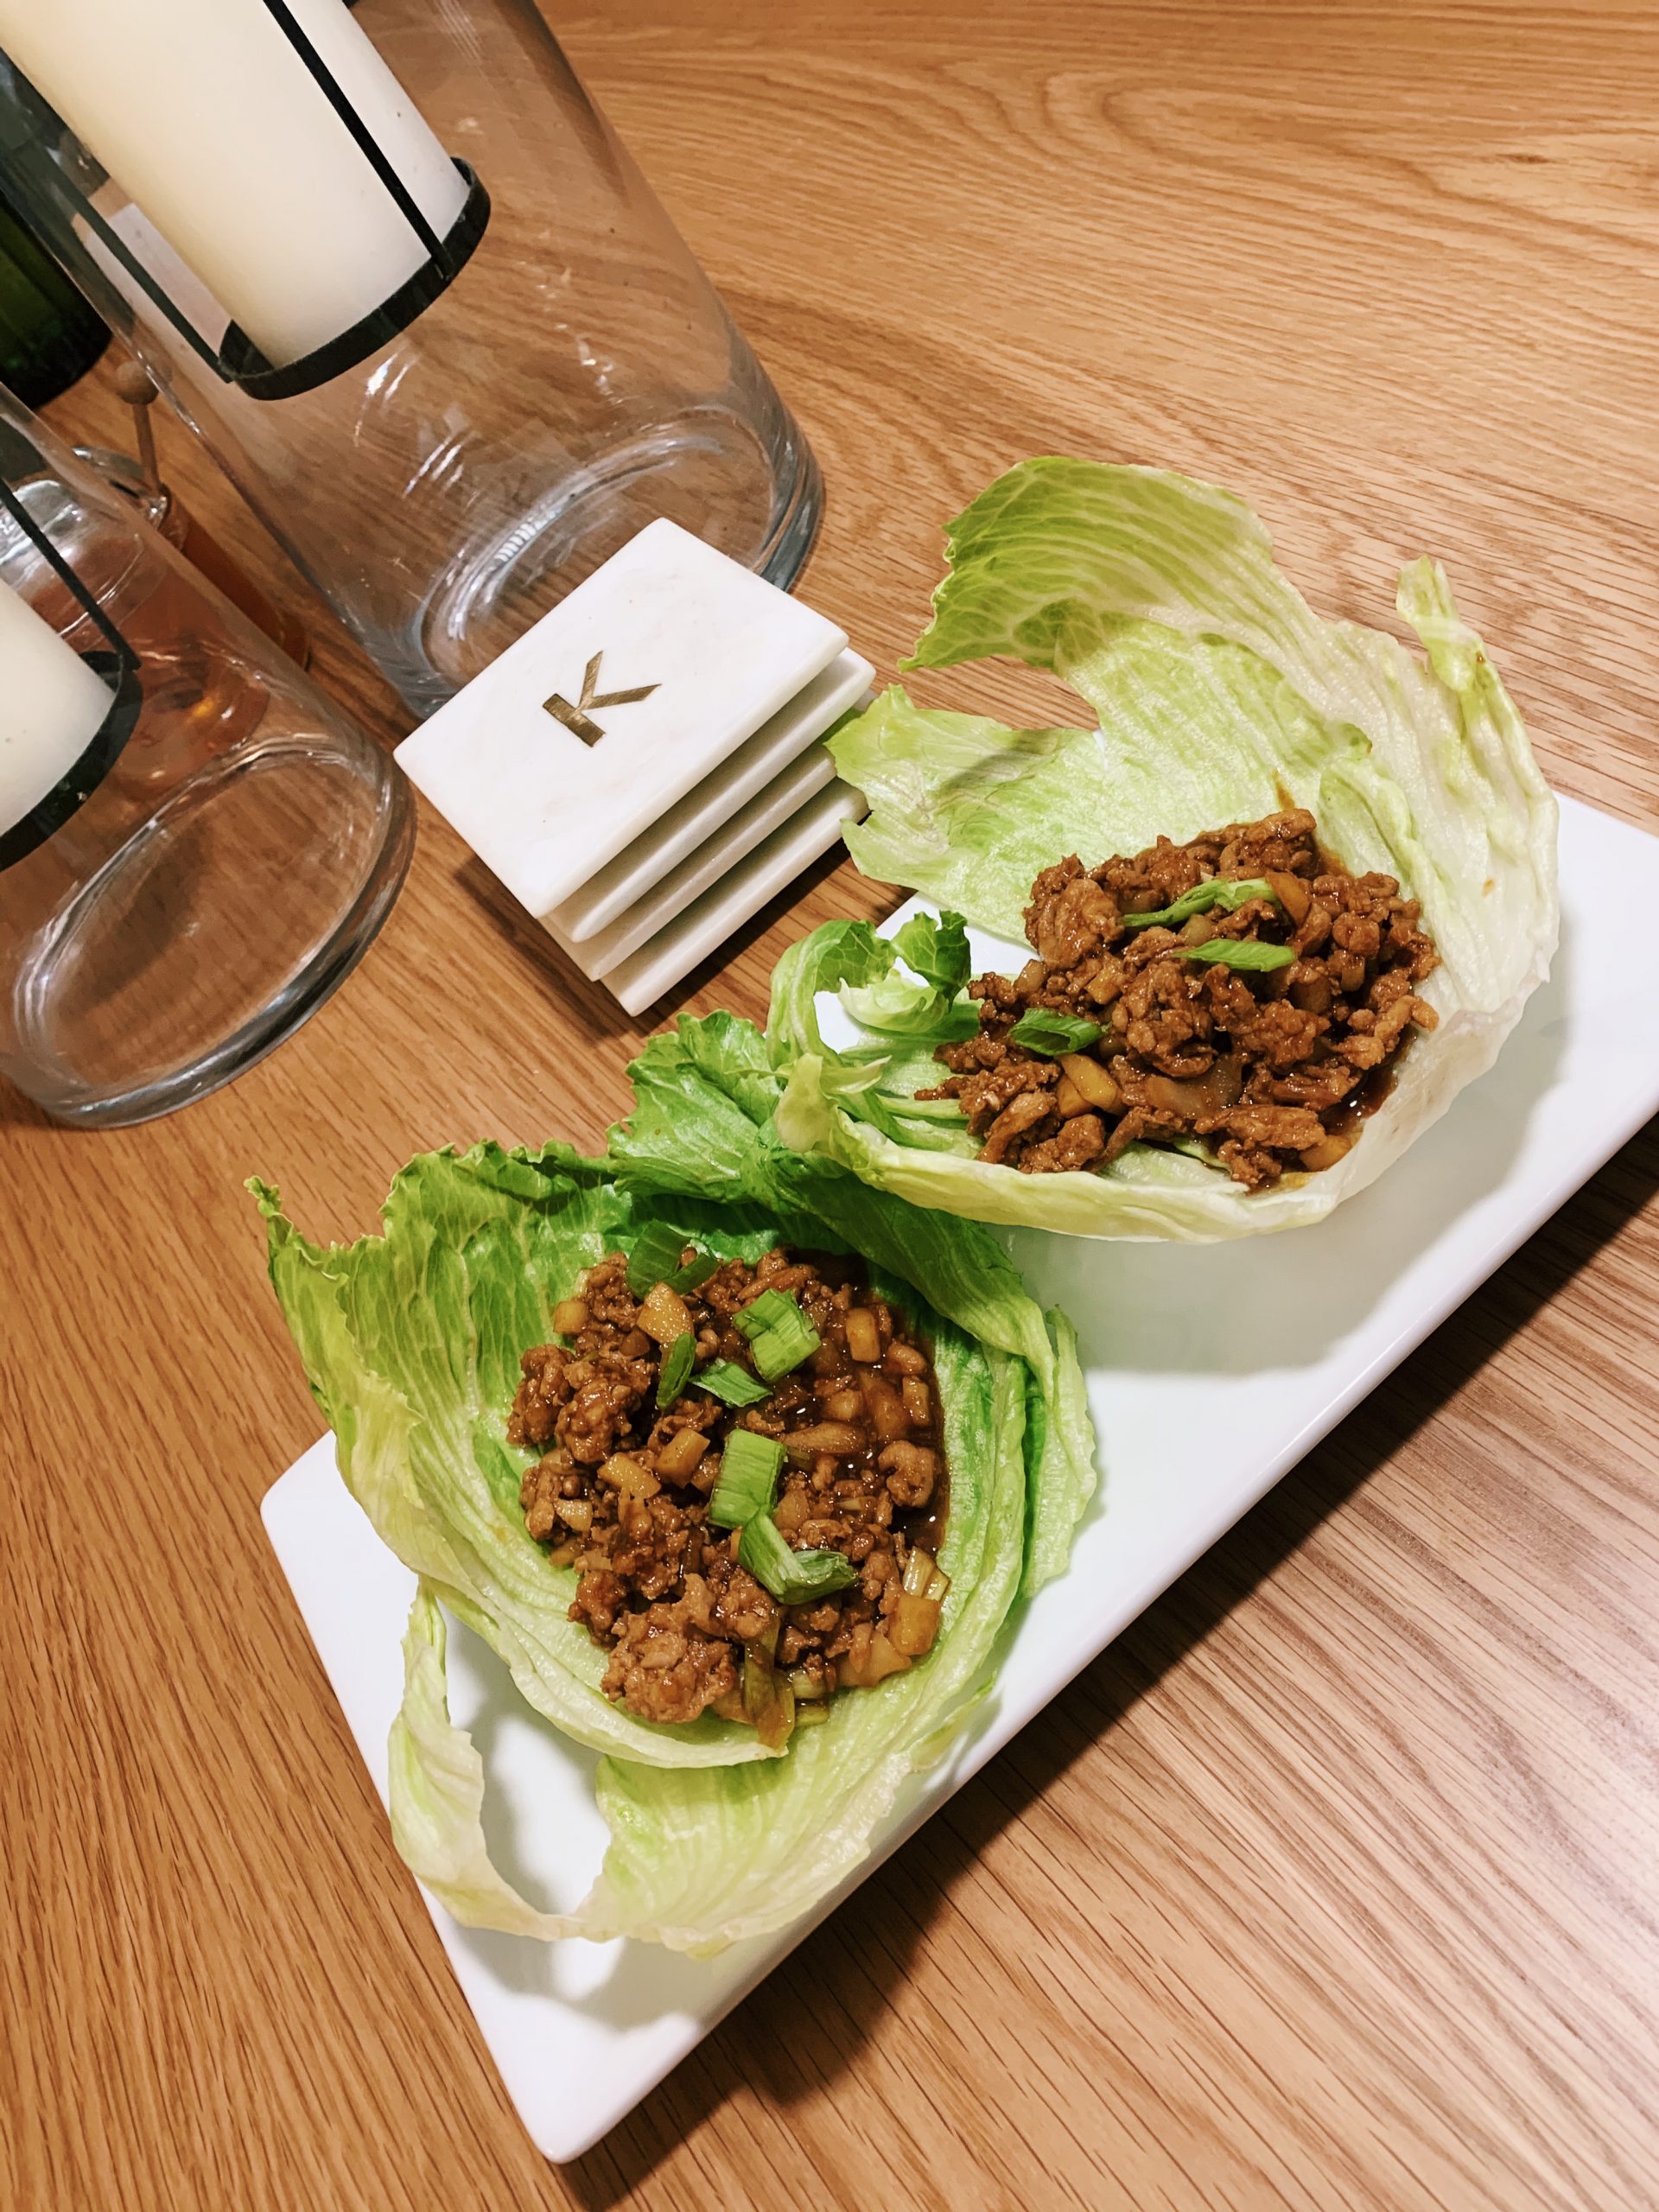 Best P.F. Chang’s Copycat Lettuce Wrap Recipe – Home Meals To Cook